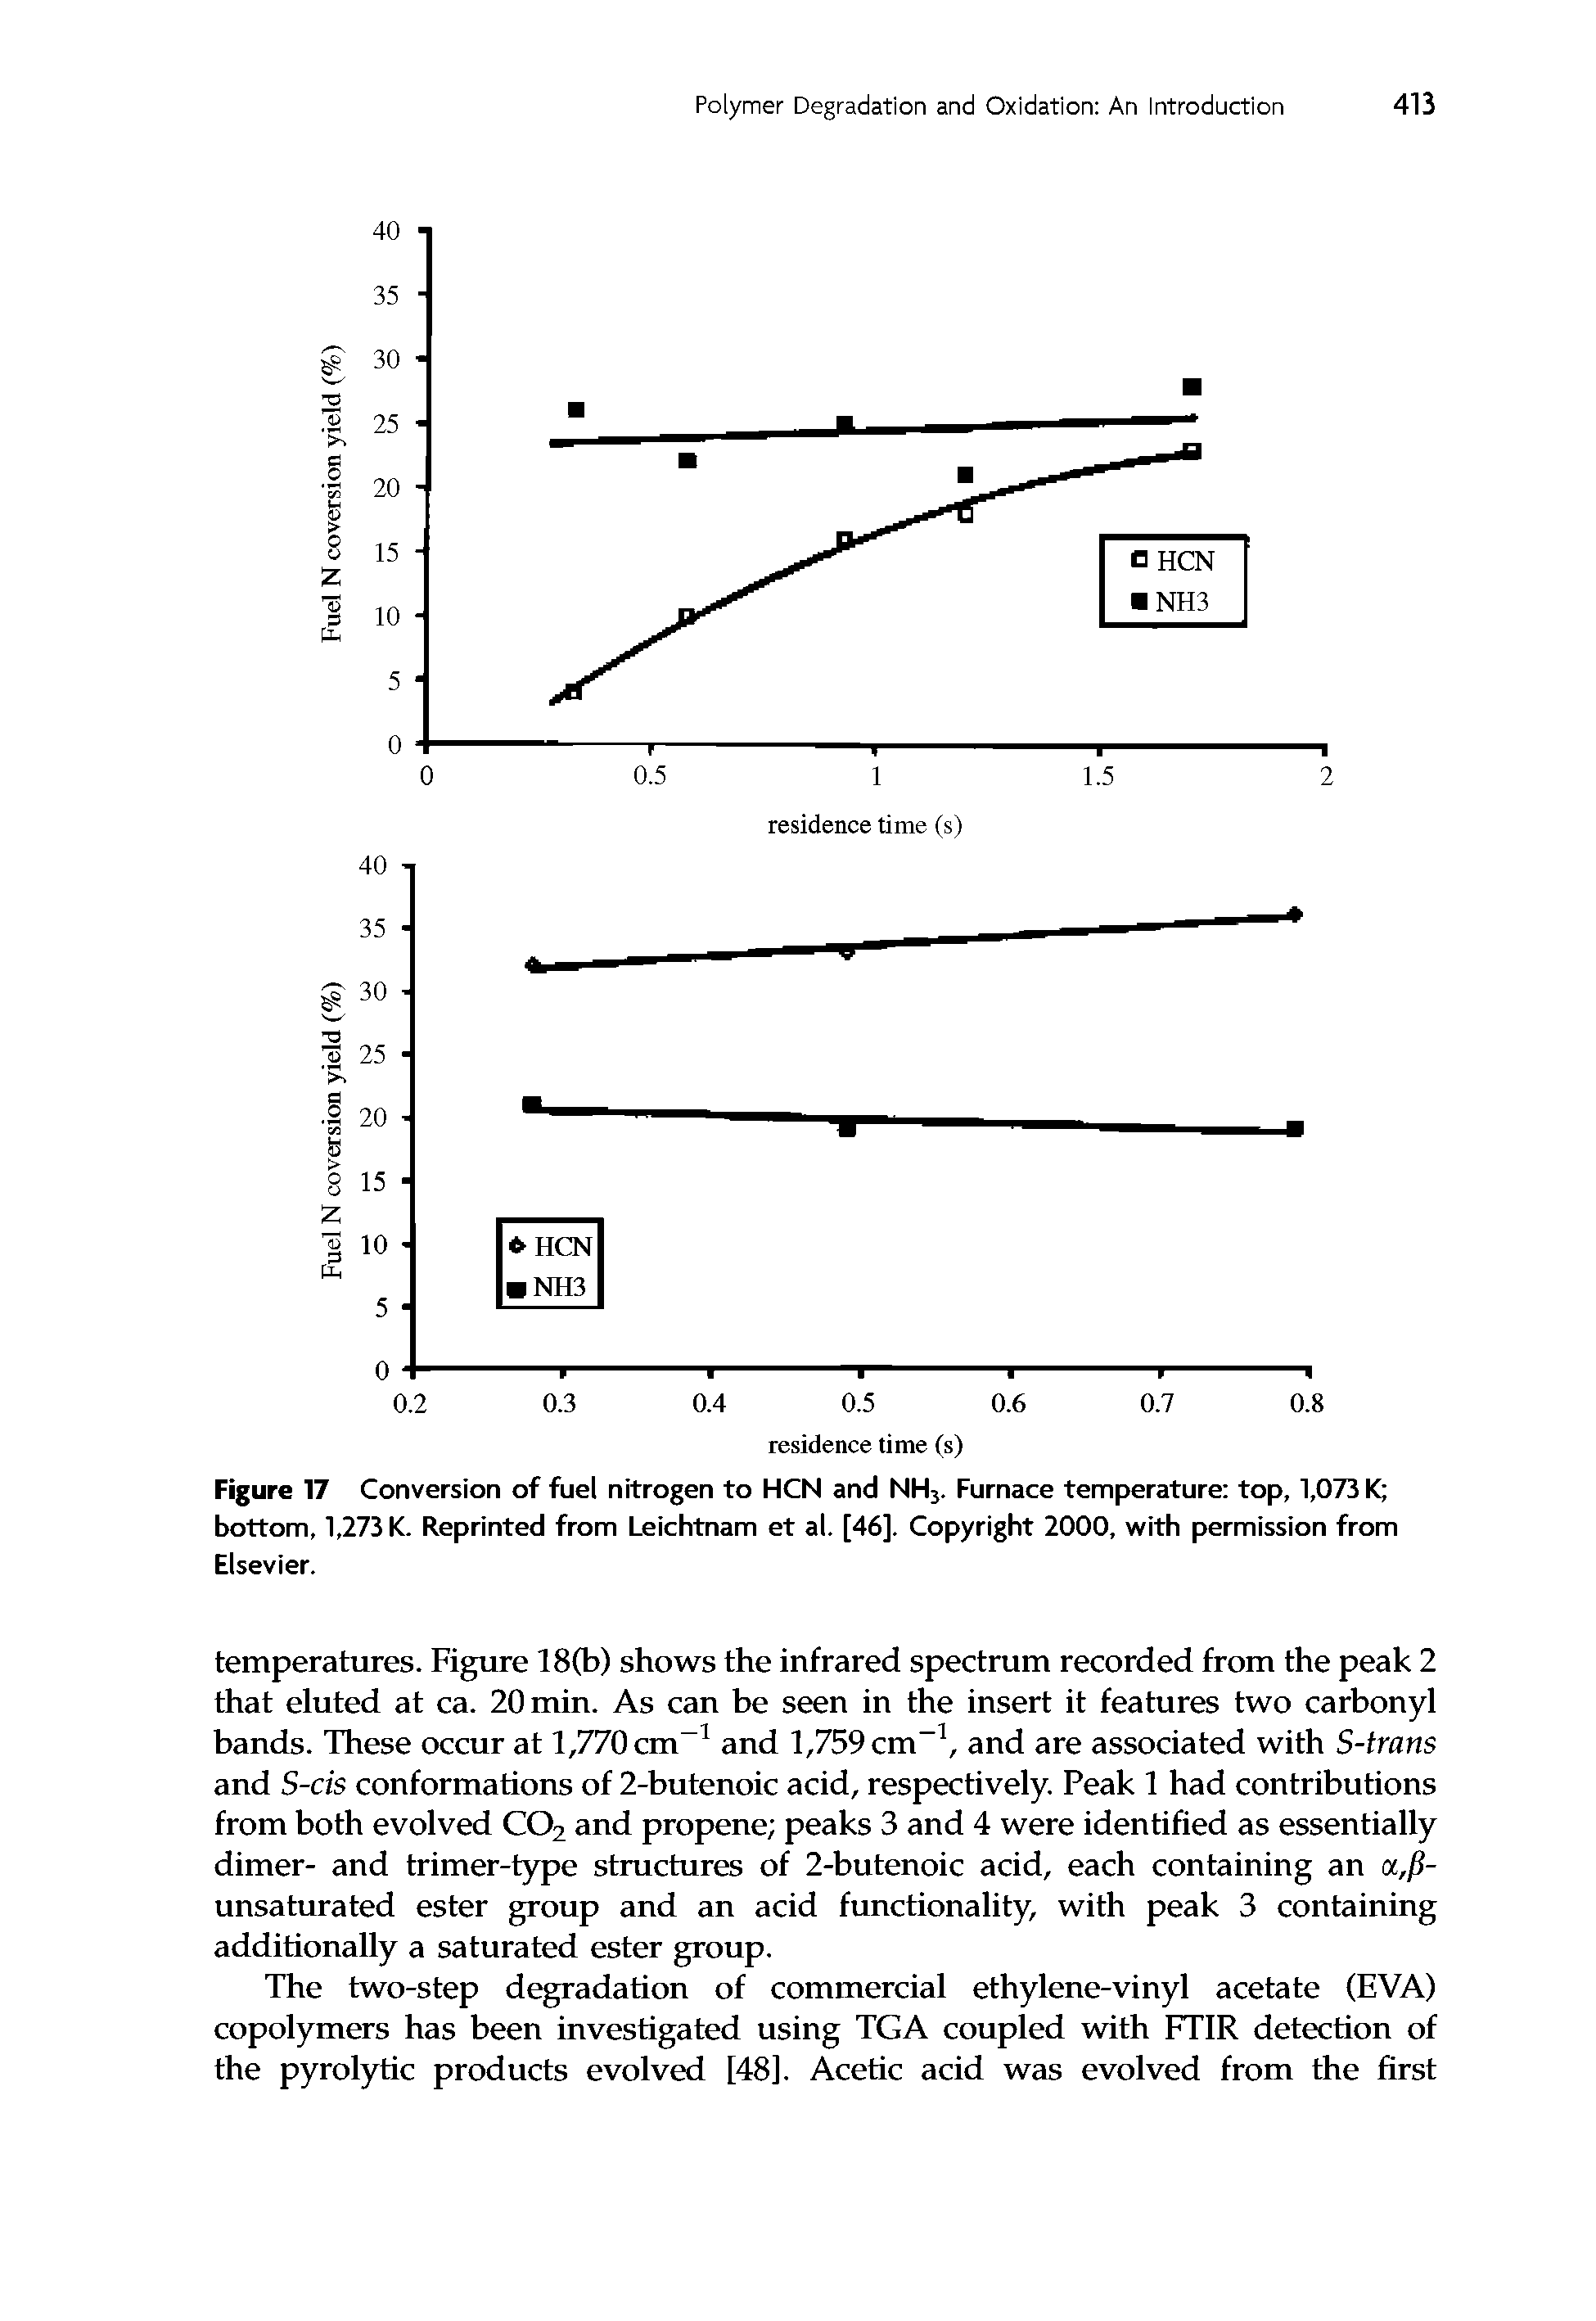 Figure 17 Conversion of fuel nitrogen to HCN and NH3. Furnace temperature top, 1,073 K bottom, 1,273 K. Reprinted from Leichtnam et al. [46]. Copyright 2000, with permission from Elsevier.